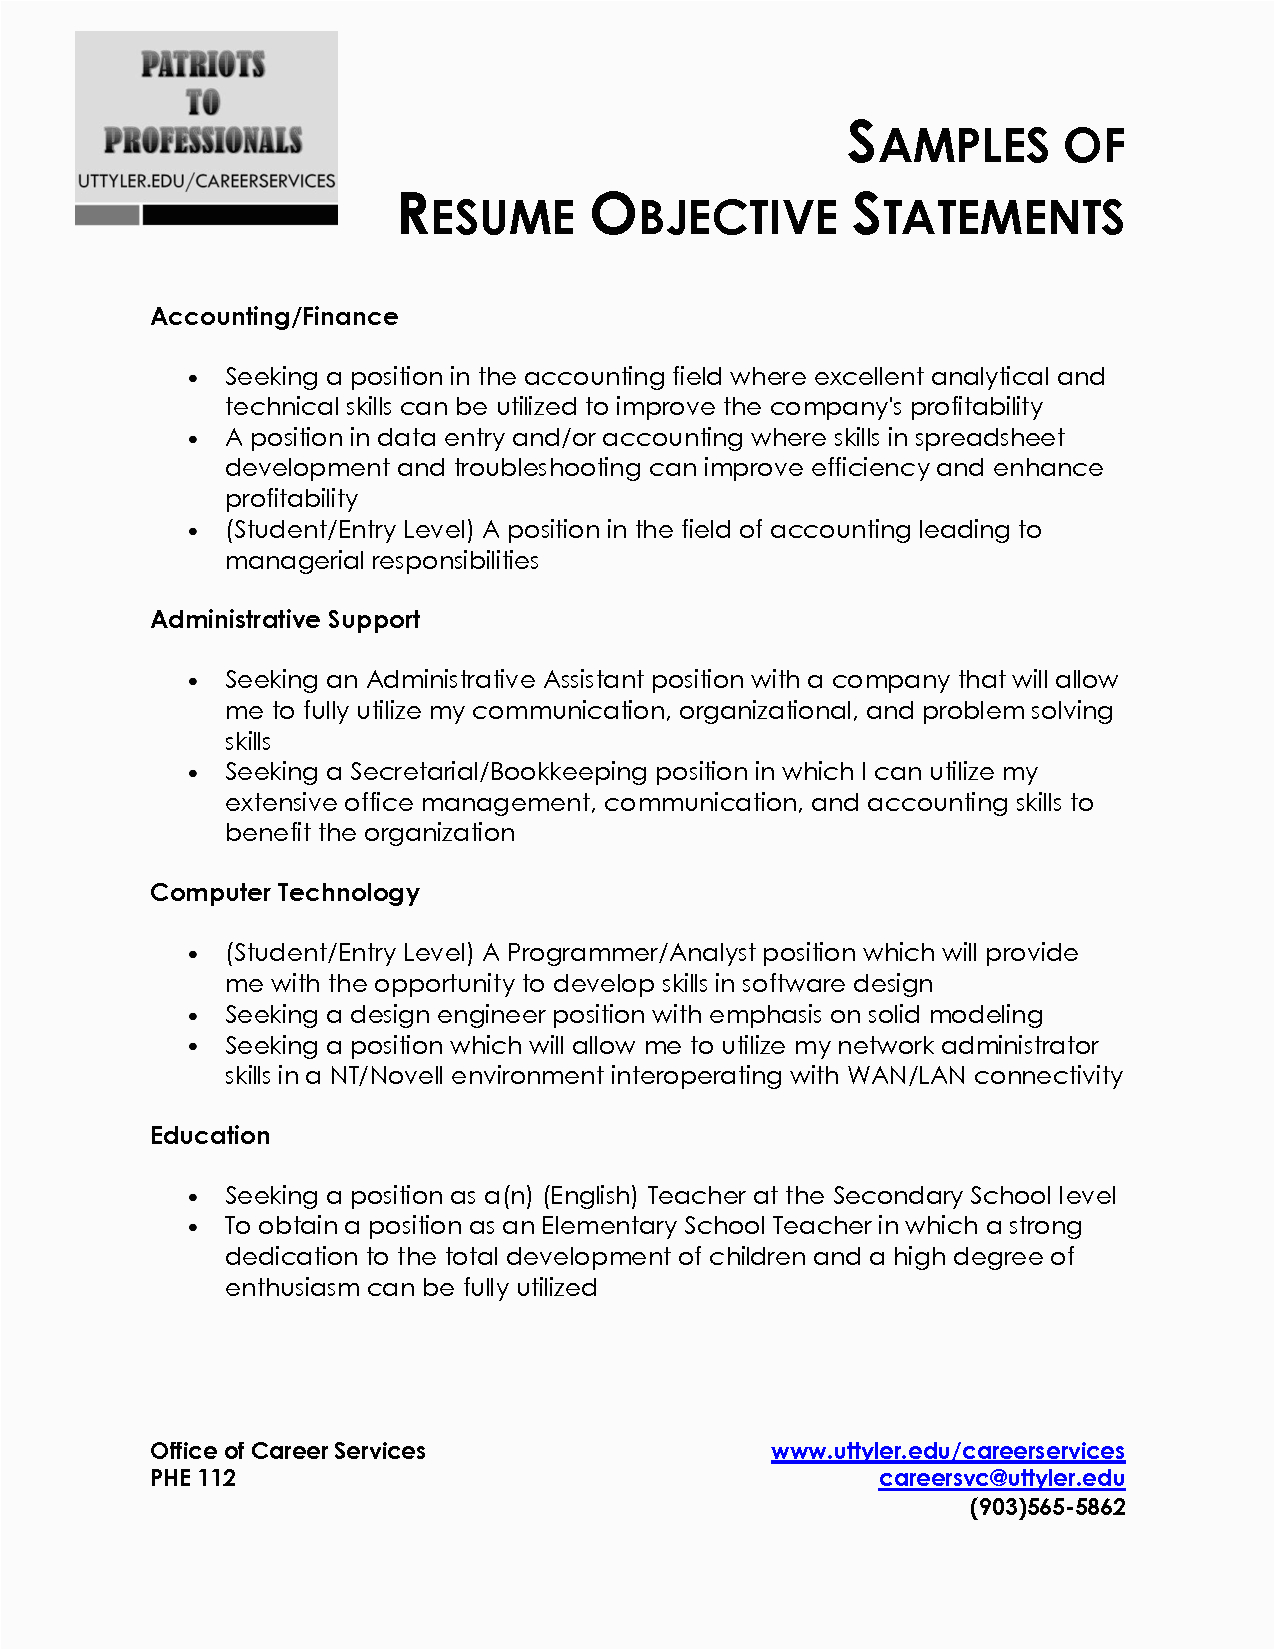 Sample Job Objectives for A Resume Resume Objective Statement